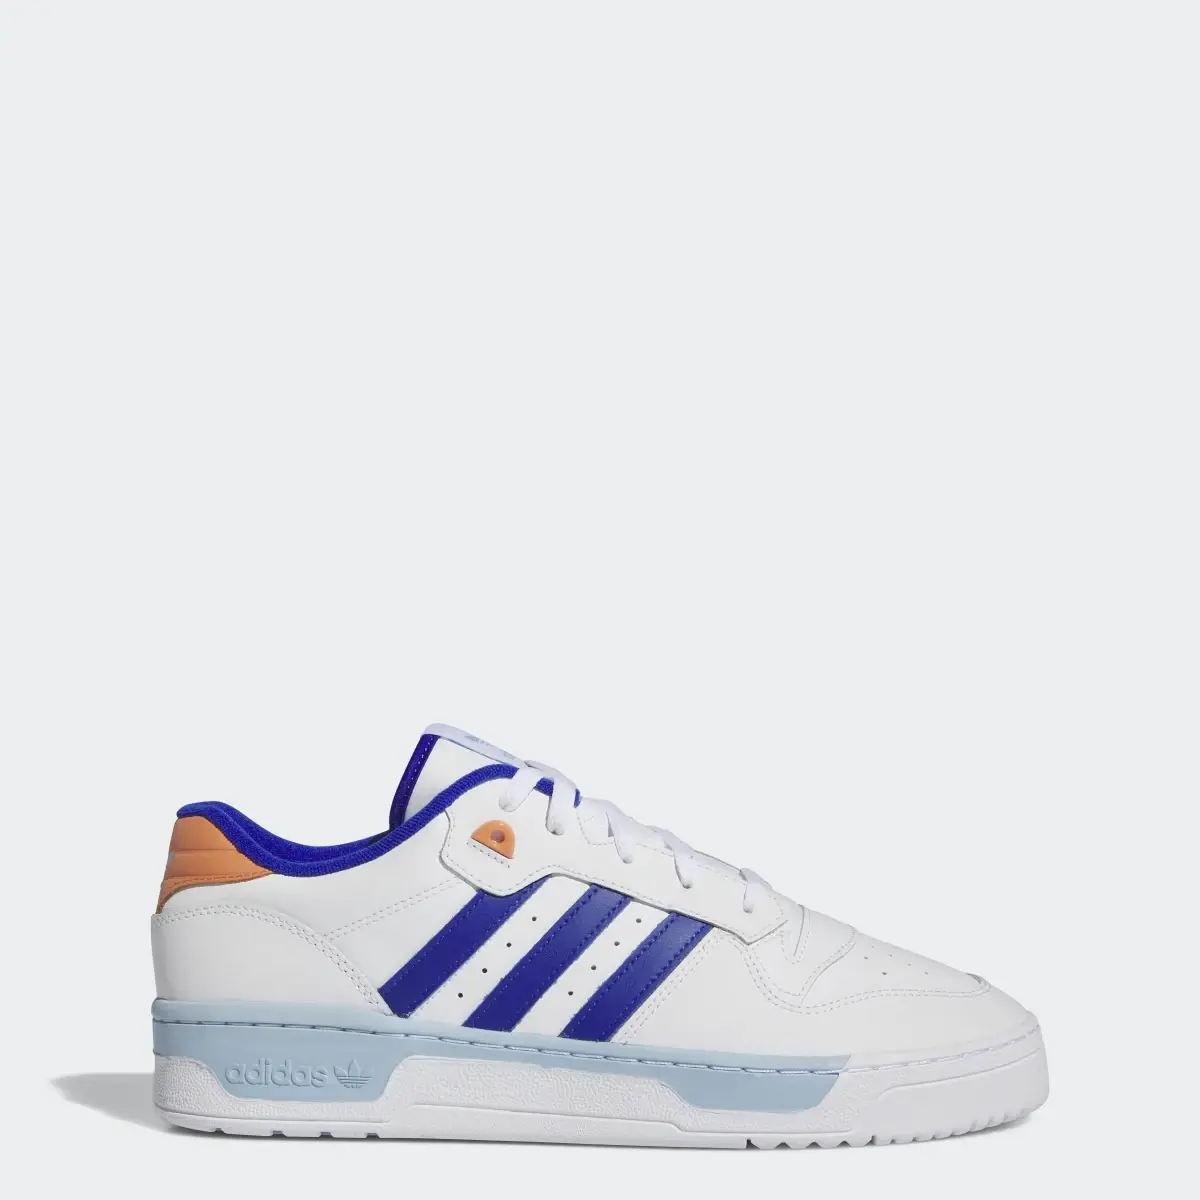 Adidas Rivalry Shoes. 1